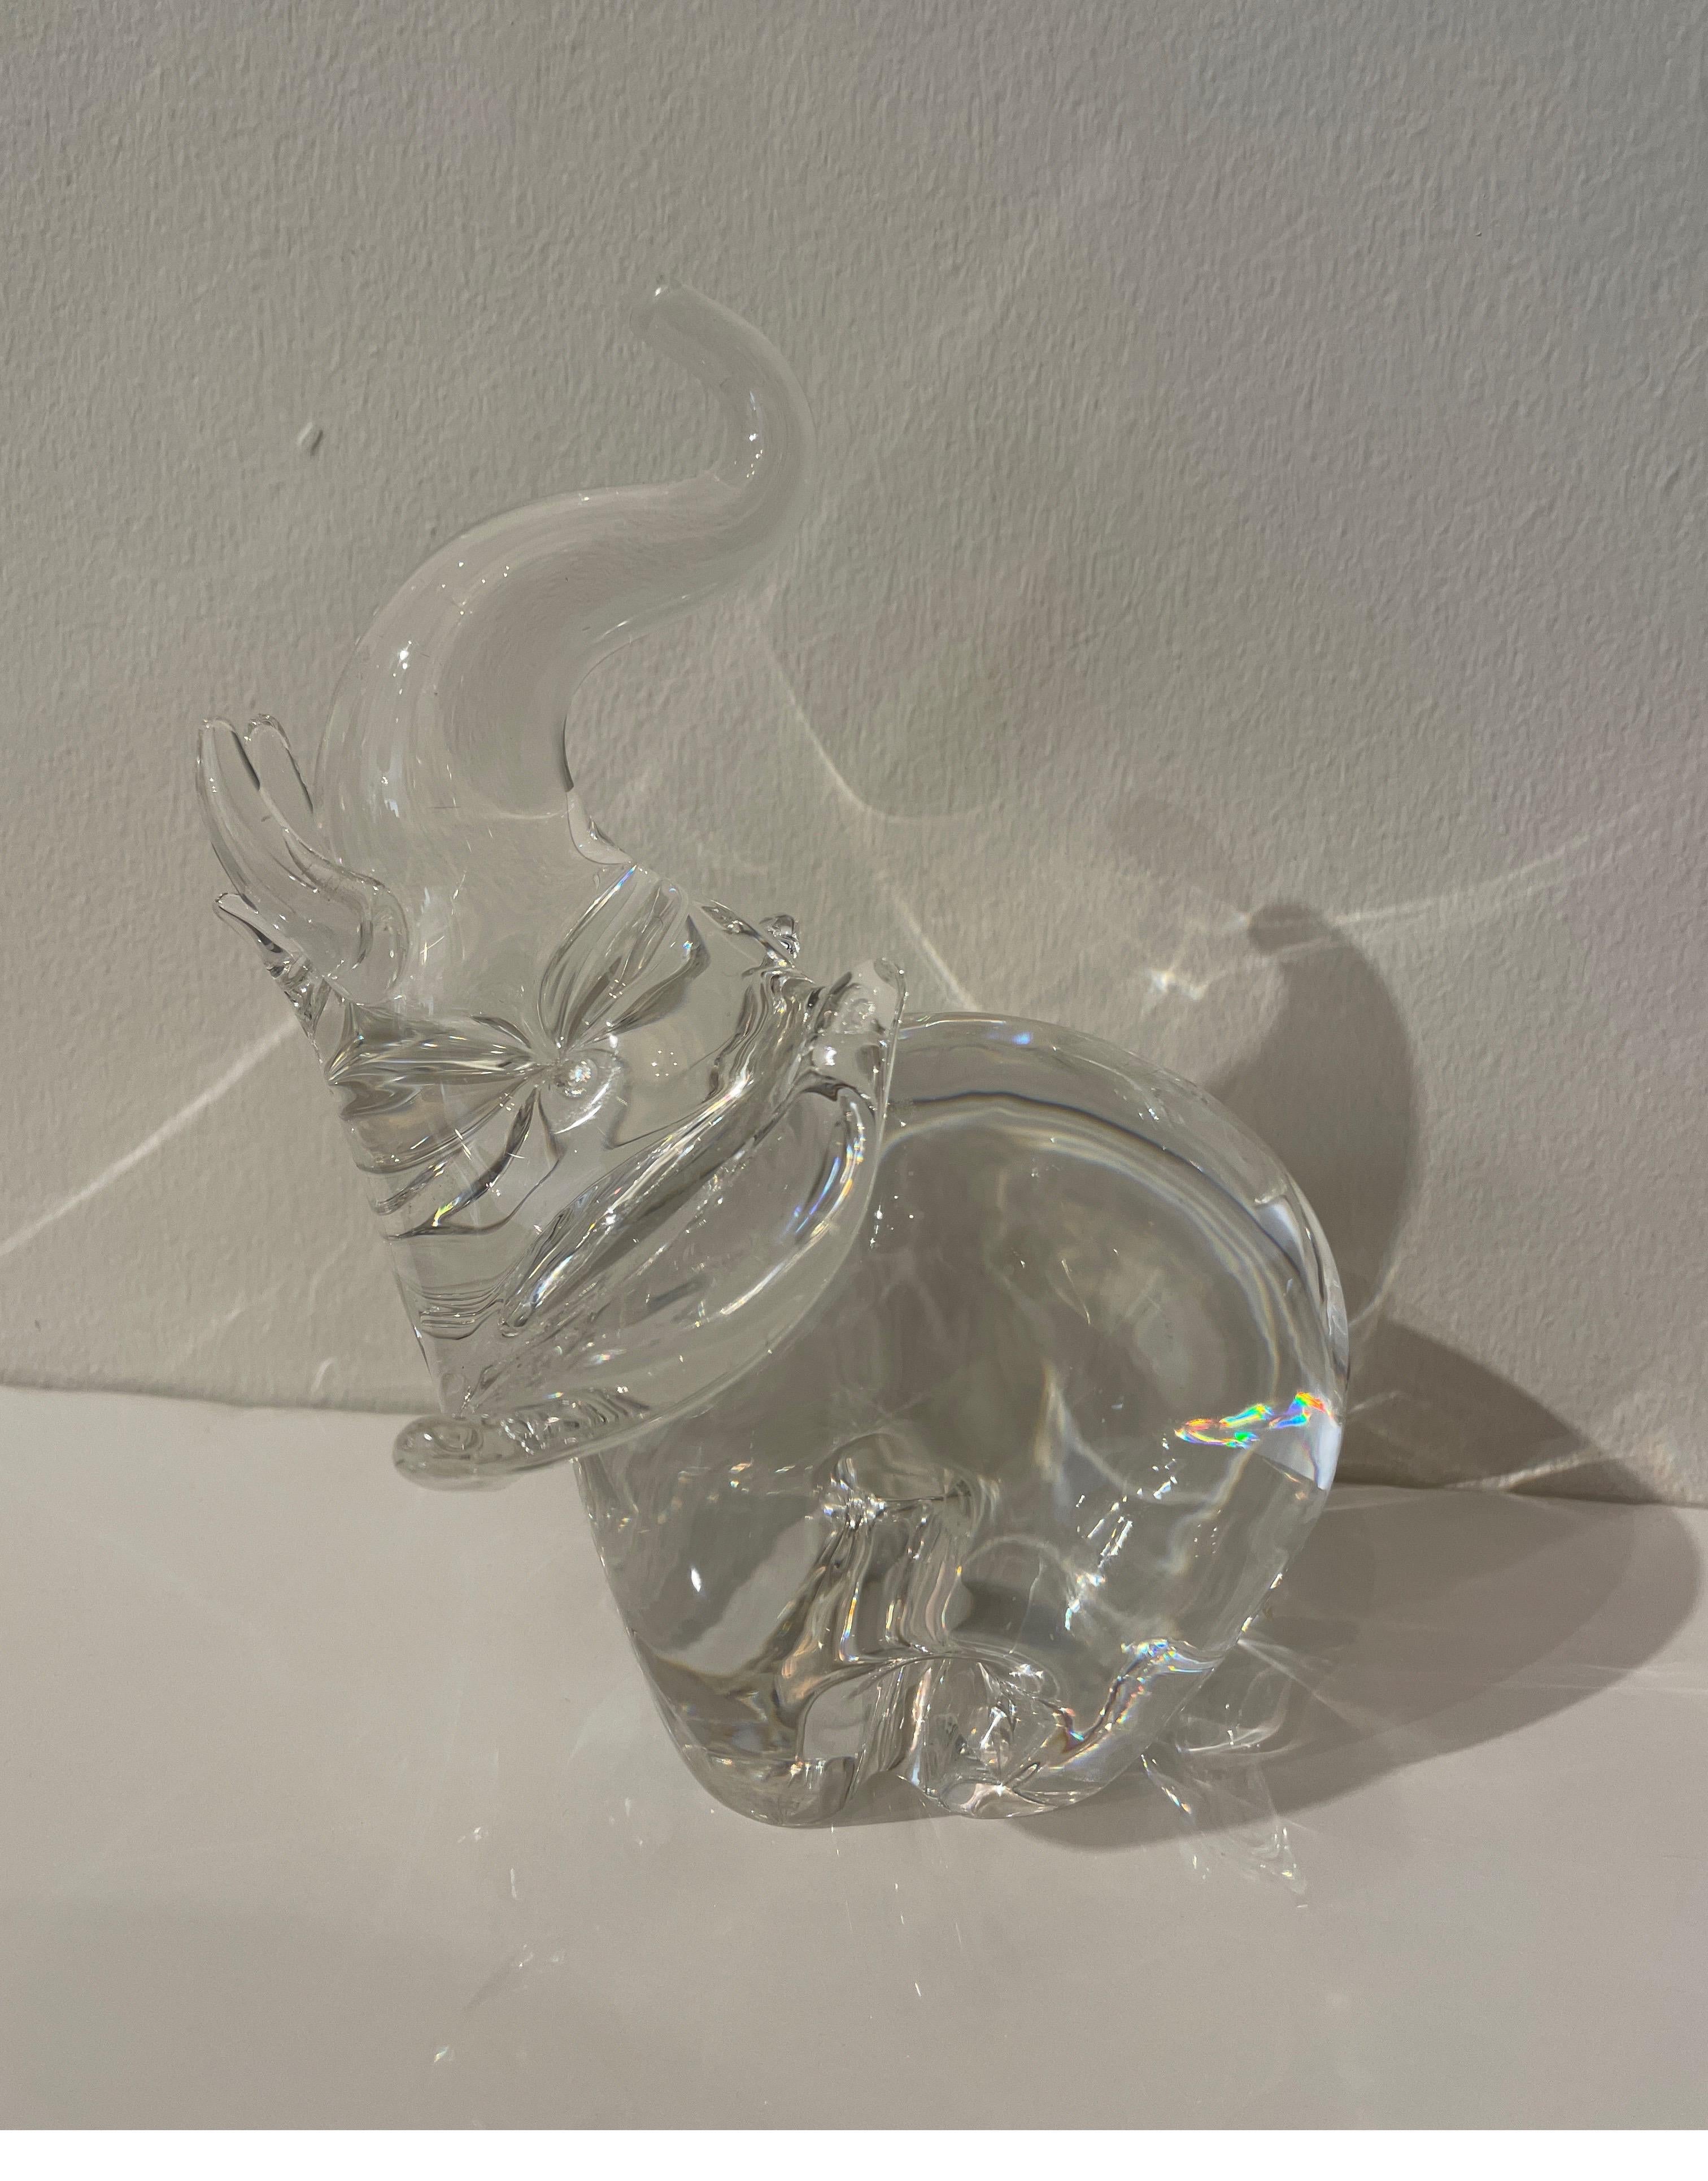 Vintage Steuben glass elephant sculpture with an upward trunk. This good luck piece is a welcome addition to any collection.